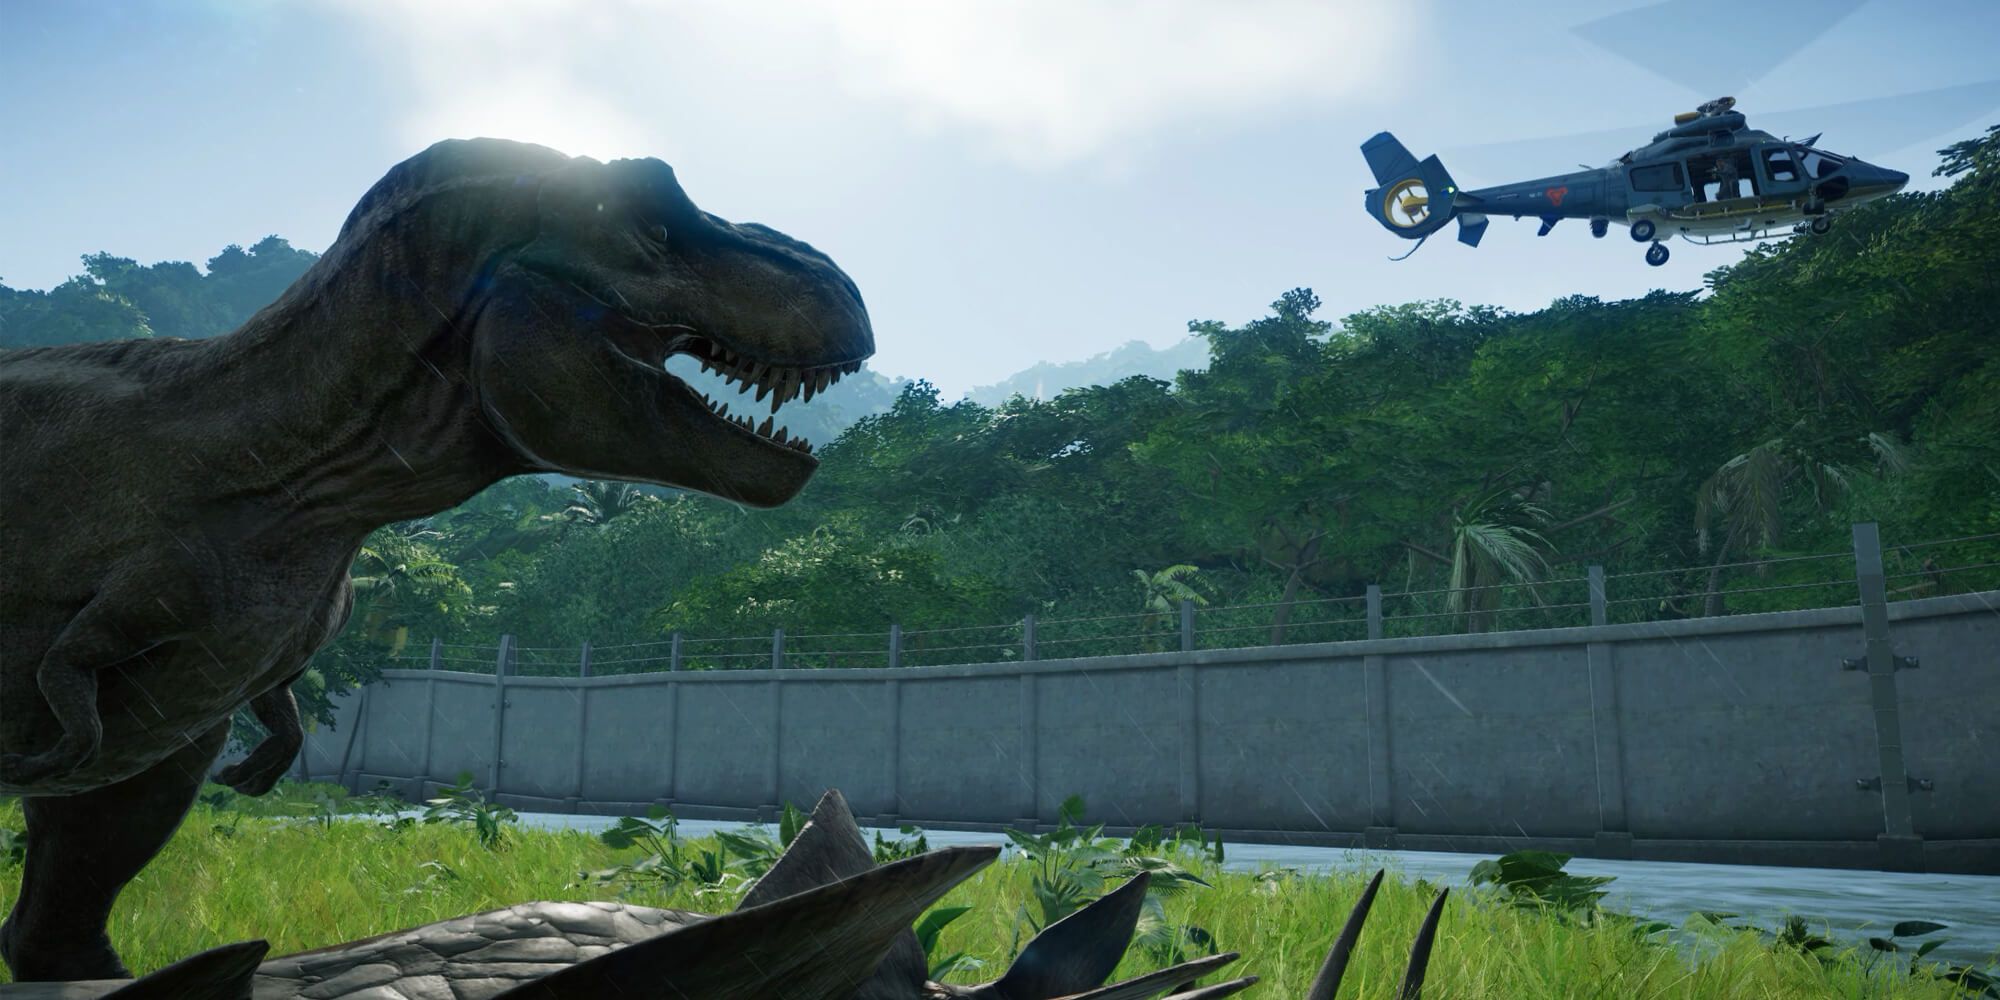 A T-Rex Looks At The Fence And Helicopter